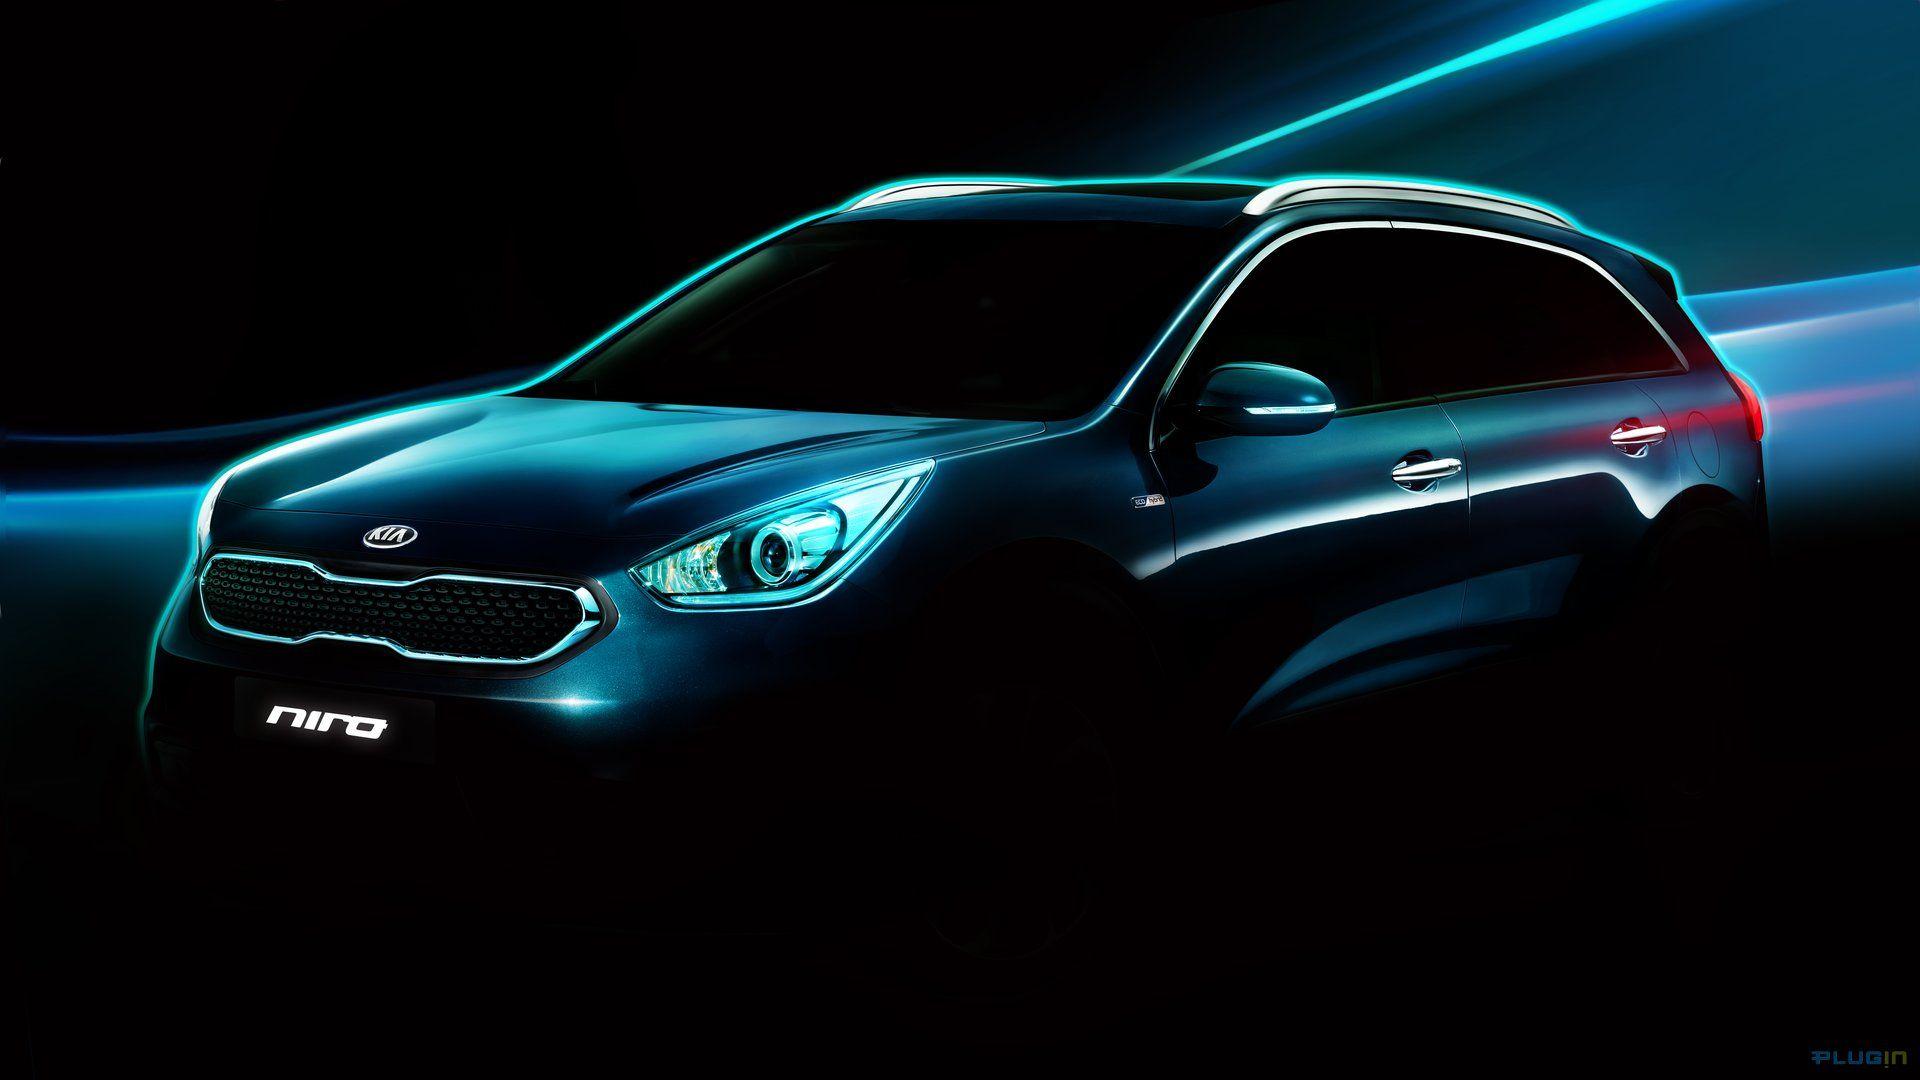 Kia Niro featured on first official Wallpaper